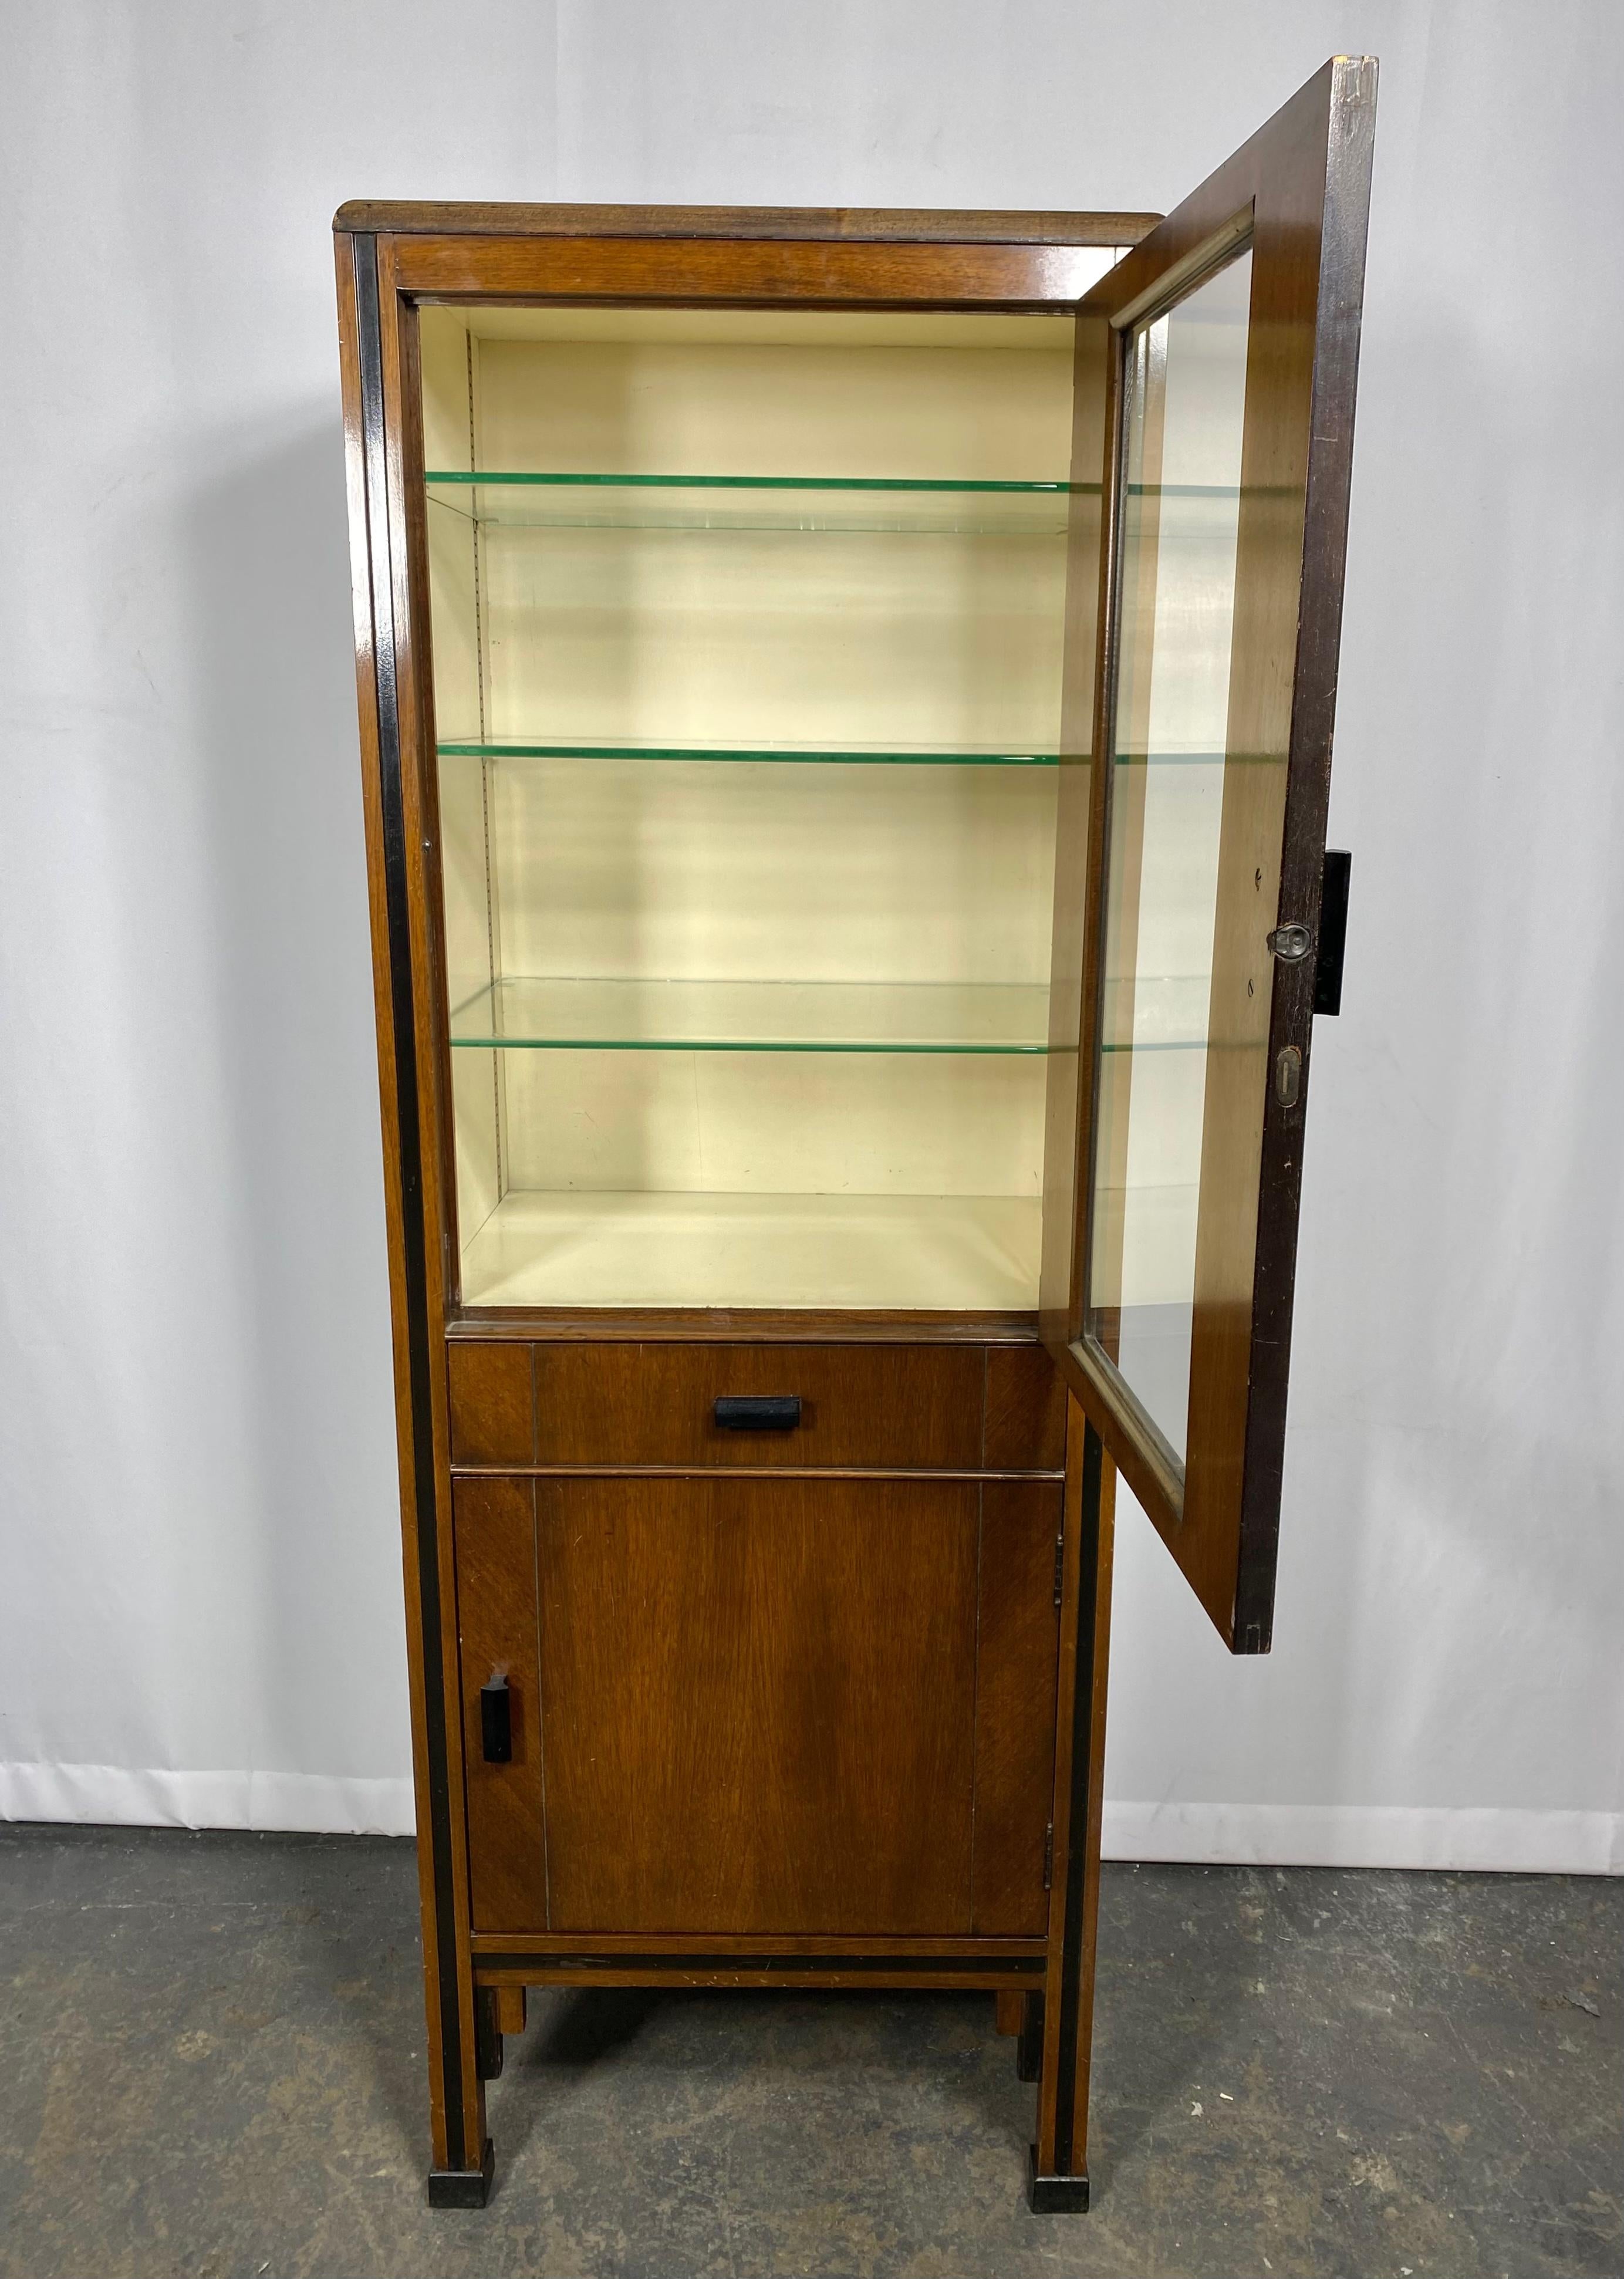 Elegant Art Deco Dental cabinet, walnut and glass, manufactured by ENOCHS For Sale 3